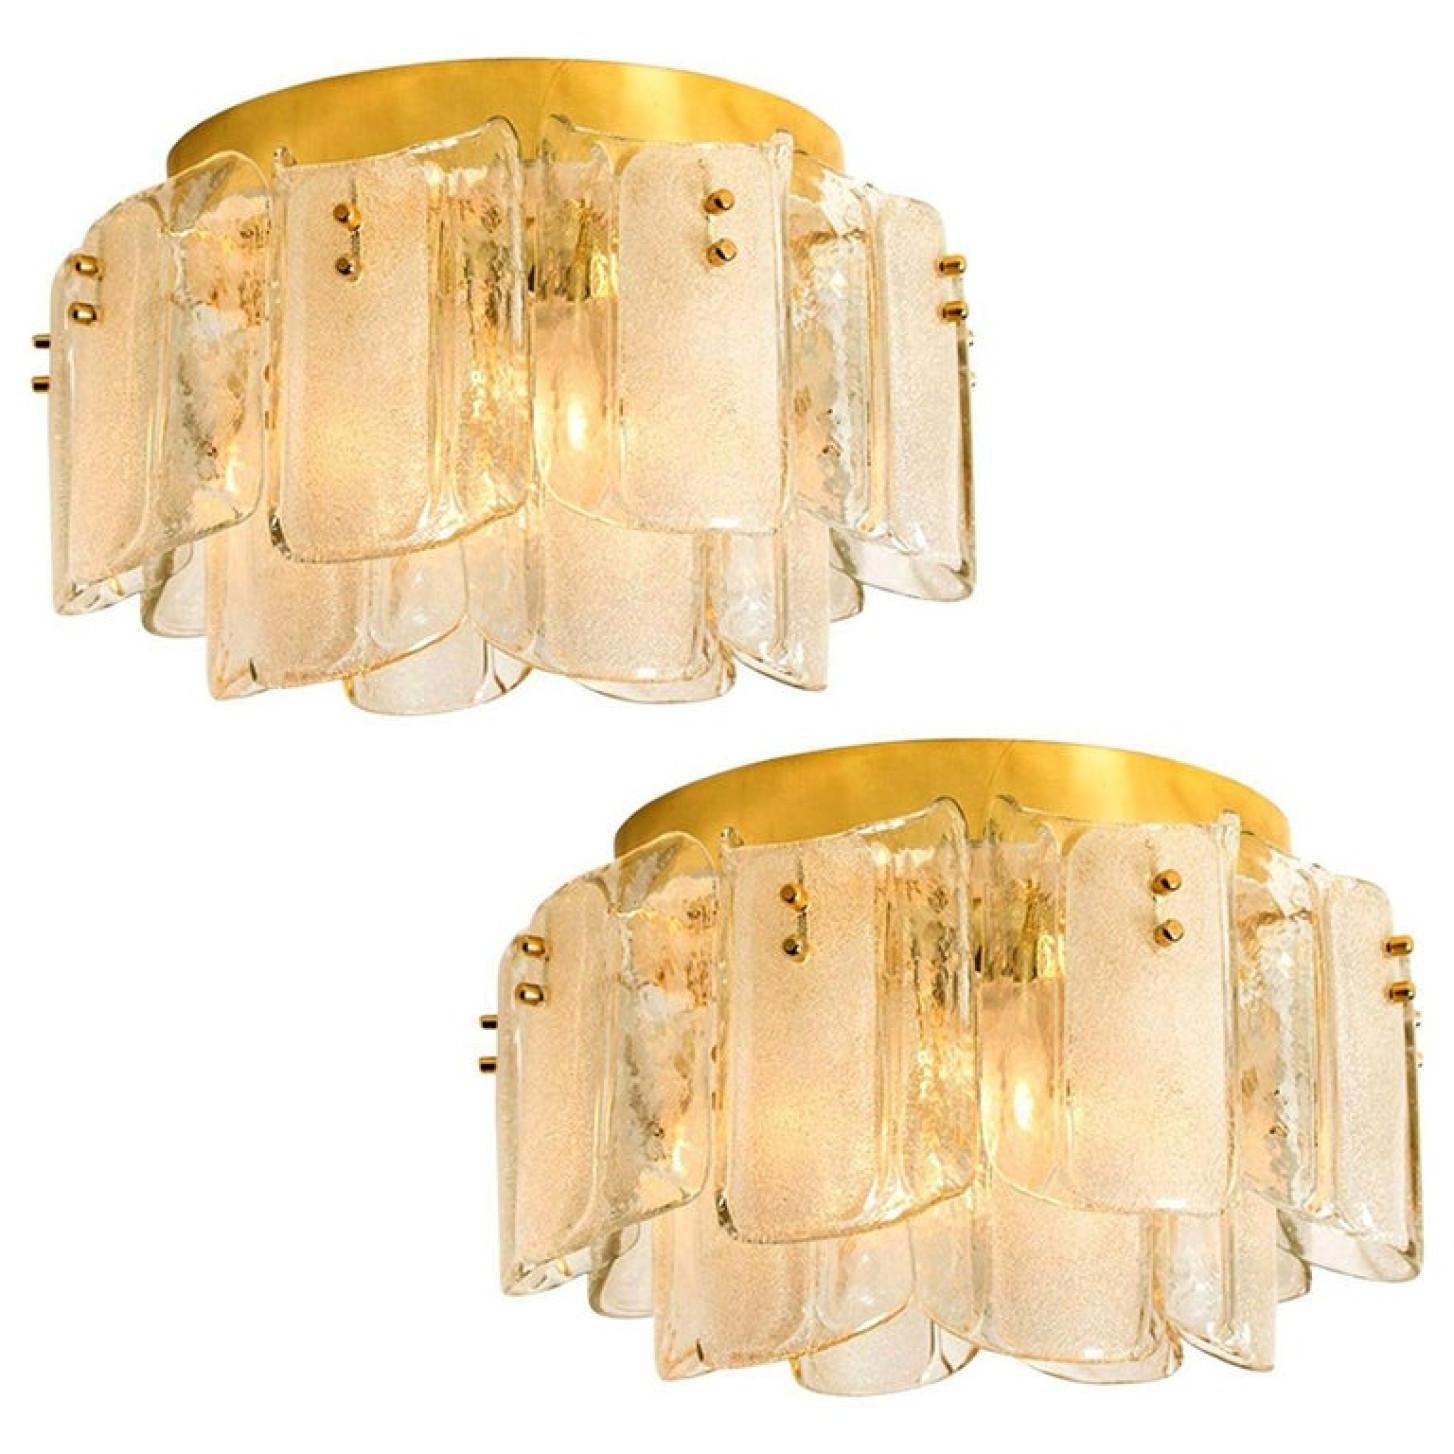 1 of the 2 unique large and elegant glass flush mounts in the style of J.T. Kalmar, manufactured in the 20th century, circa 1970 (late 1960s or early 1970s). Wonderful high-end light fixtures with brass detail and 16 thick textured blown glass